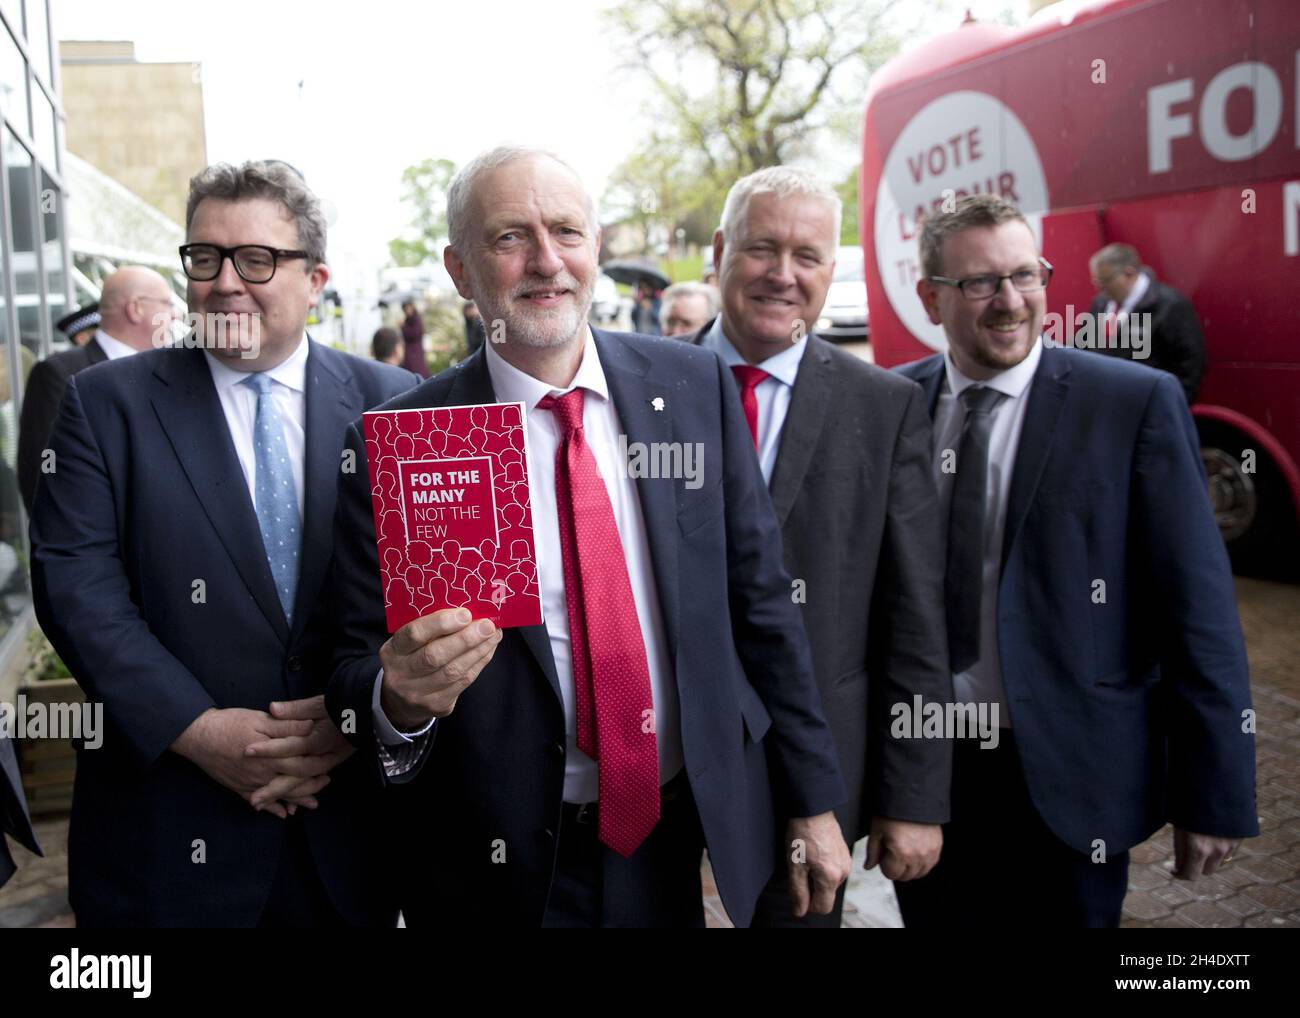 (right to left) Tom Watson, Leader of the Labour Party, Jeremy Corbyn, Ian Lavery, and Andrew Gwynne arrive in the party's battle bus at an event in the University of Bradford  to launch the party's manifesto Stock Photo